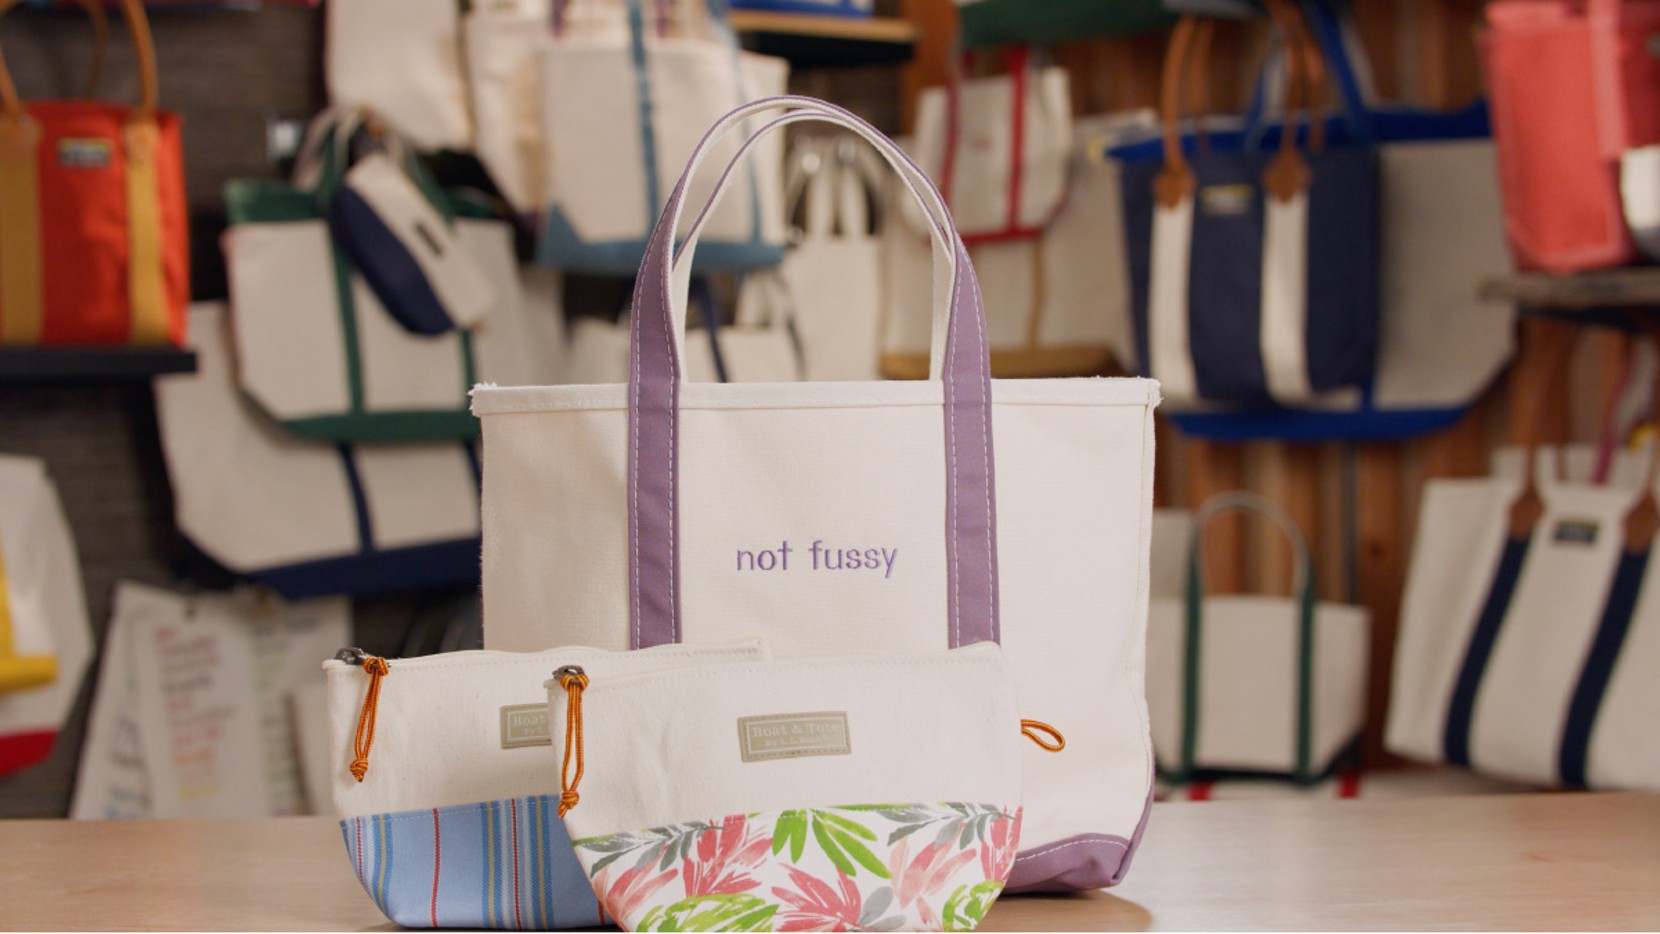 A Boat & Tote with lavender handles and monogram - "not fussy", and 2 Boat & Tote Zip Pouches.